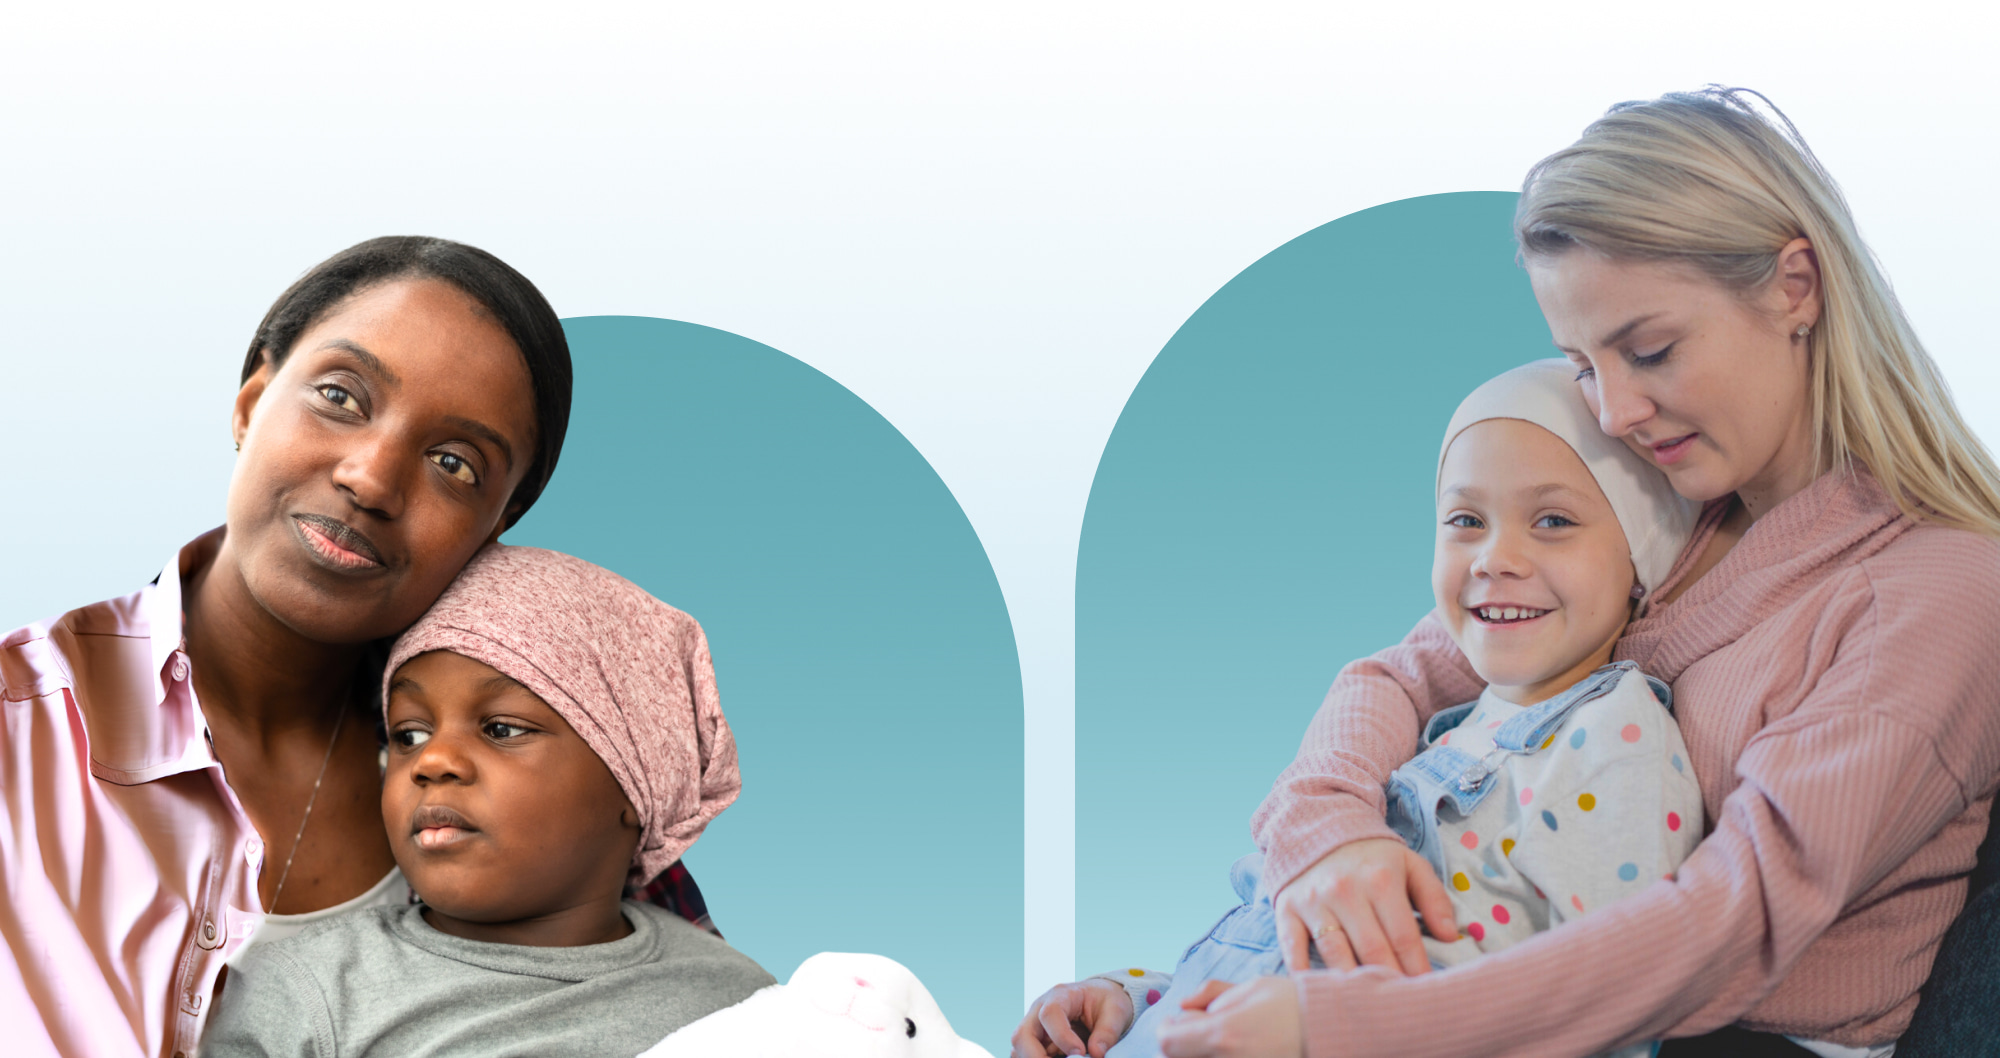 Two mothers, one Black and one white hold their young children in their arms. Both children wear head coverings as they are cancer patients. The mothers and children sit on top of pale blue gradient arch graphics.